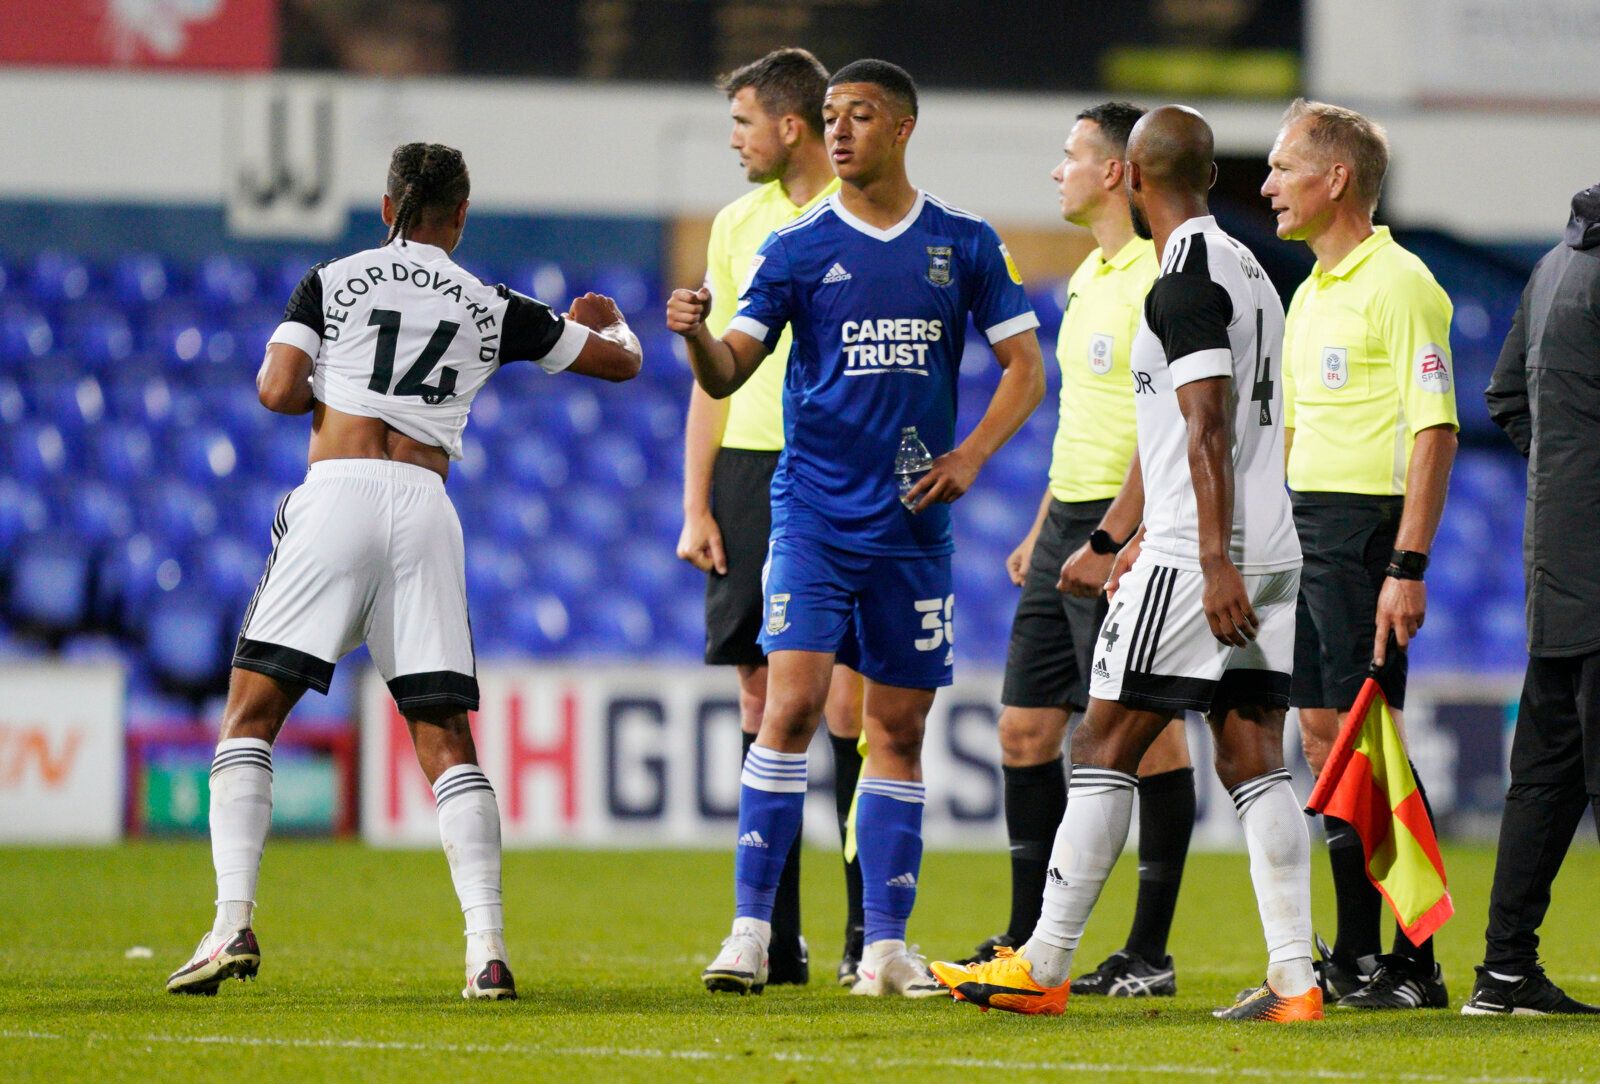 Soccer Football - Carabao Cup Second Round - Ipswich Town v Fulham - Portman Road, Ipswich, Britain - September 16, 2020. Fulham's Bobby Reid touches fists with Ipswich Town's Myles Kenlock after the match Pool via REUTERS/Will Oliver EDITORIAL USE ONLY. No use with unauthorized audio, video, data, fixture lists, club/league logos or 'live' services. Online in-match use limited to 75 images, no video emulation. No use in betting, games or single club/league/player publications.  Please contact y